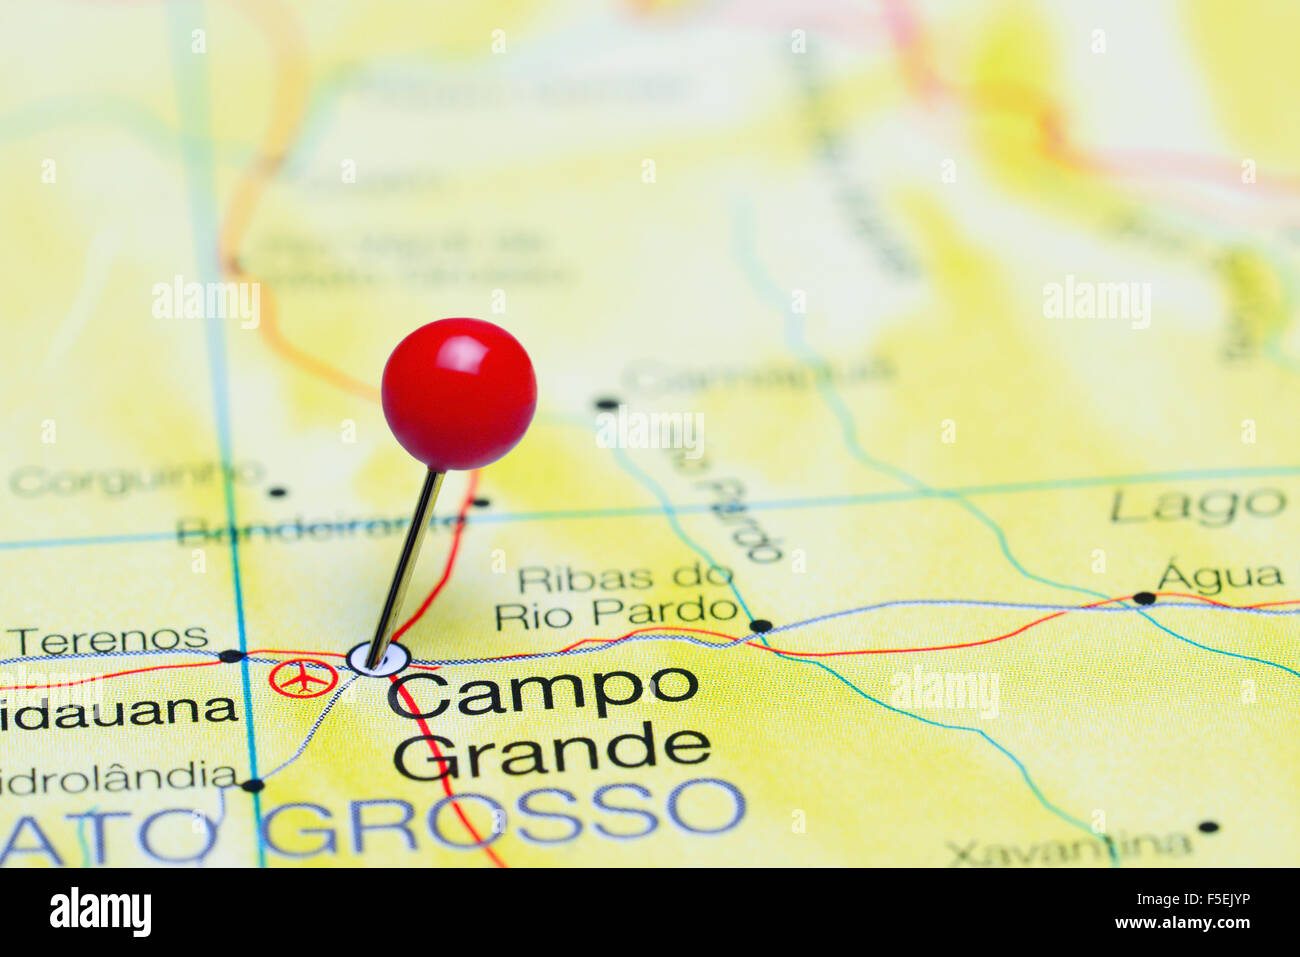 Campo Grande pinned on a map of Brazil Stock Photo